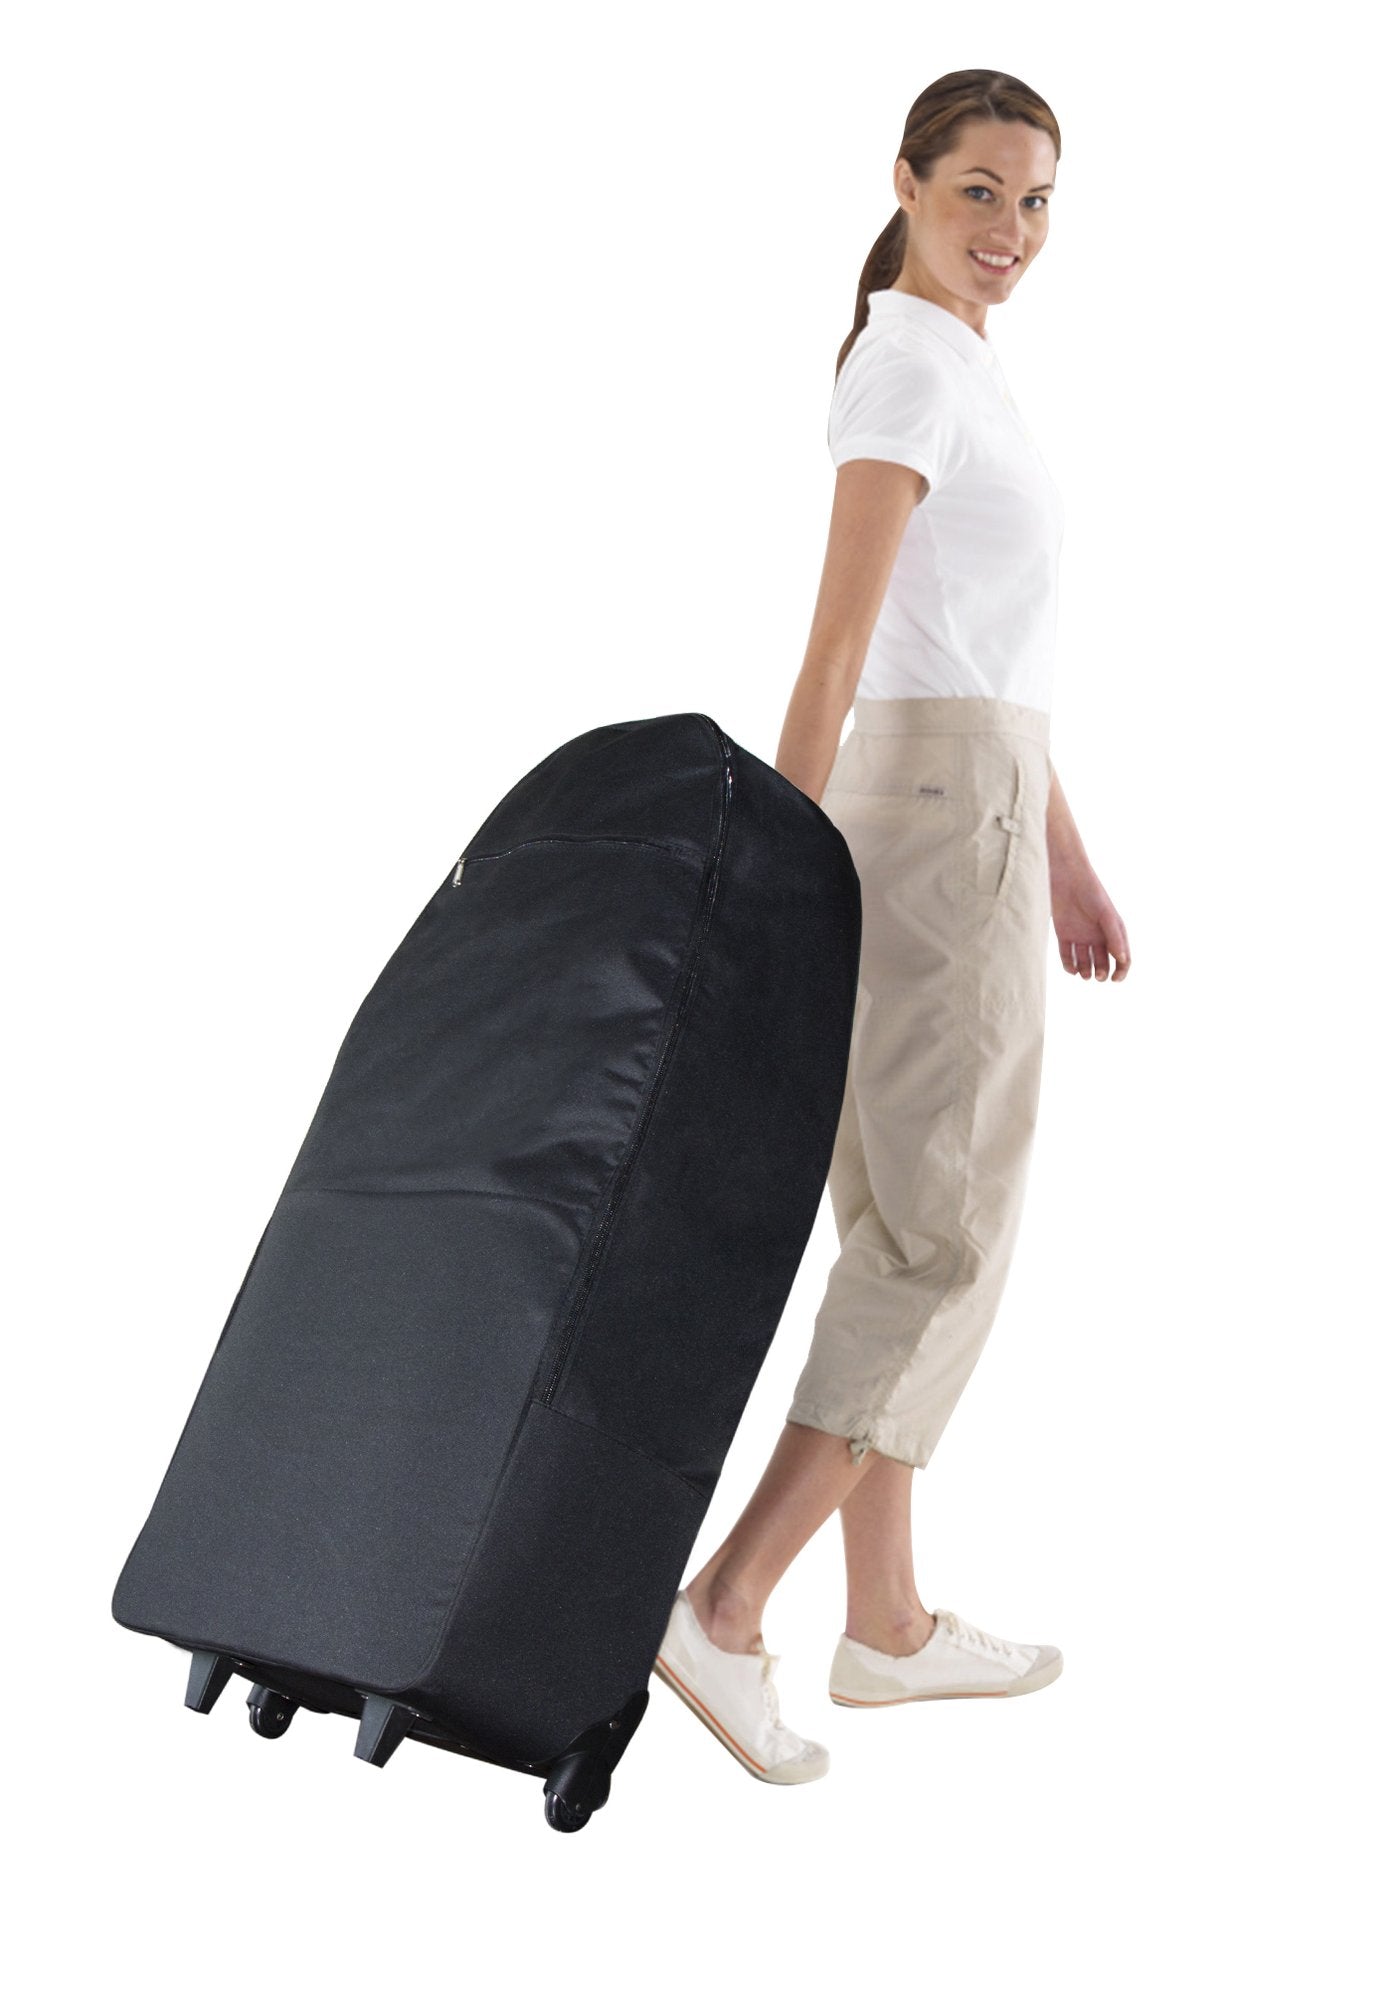 Wheeled Carrying Case for Professional Chair